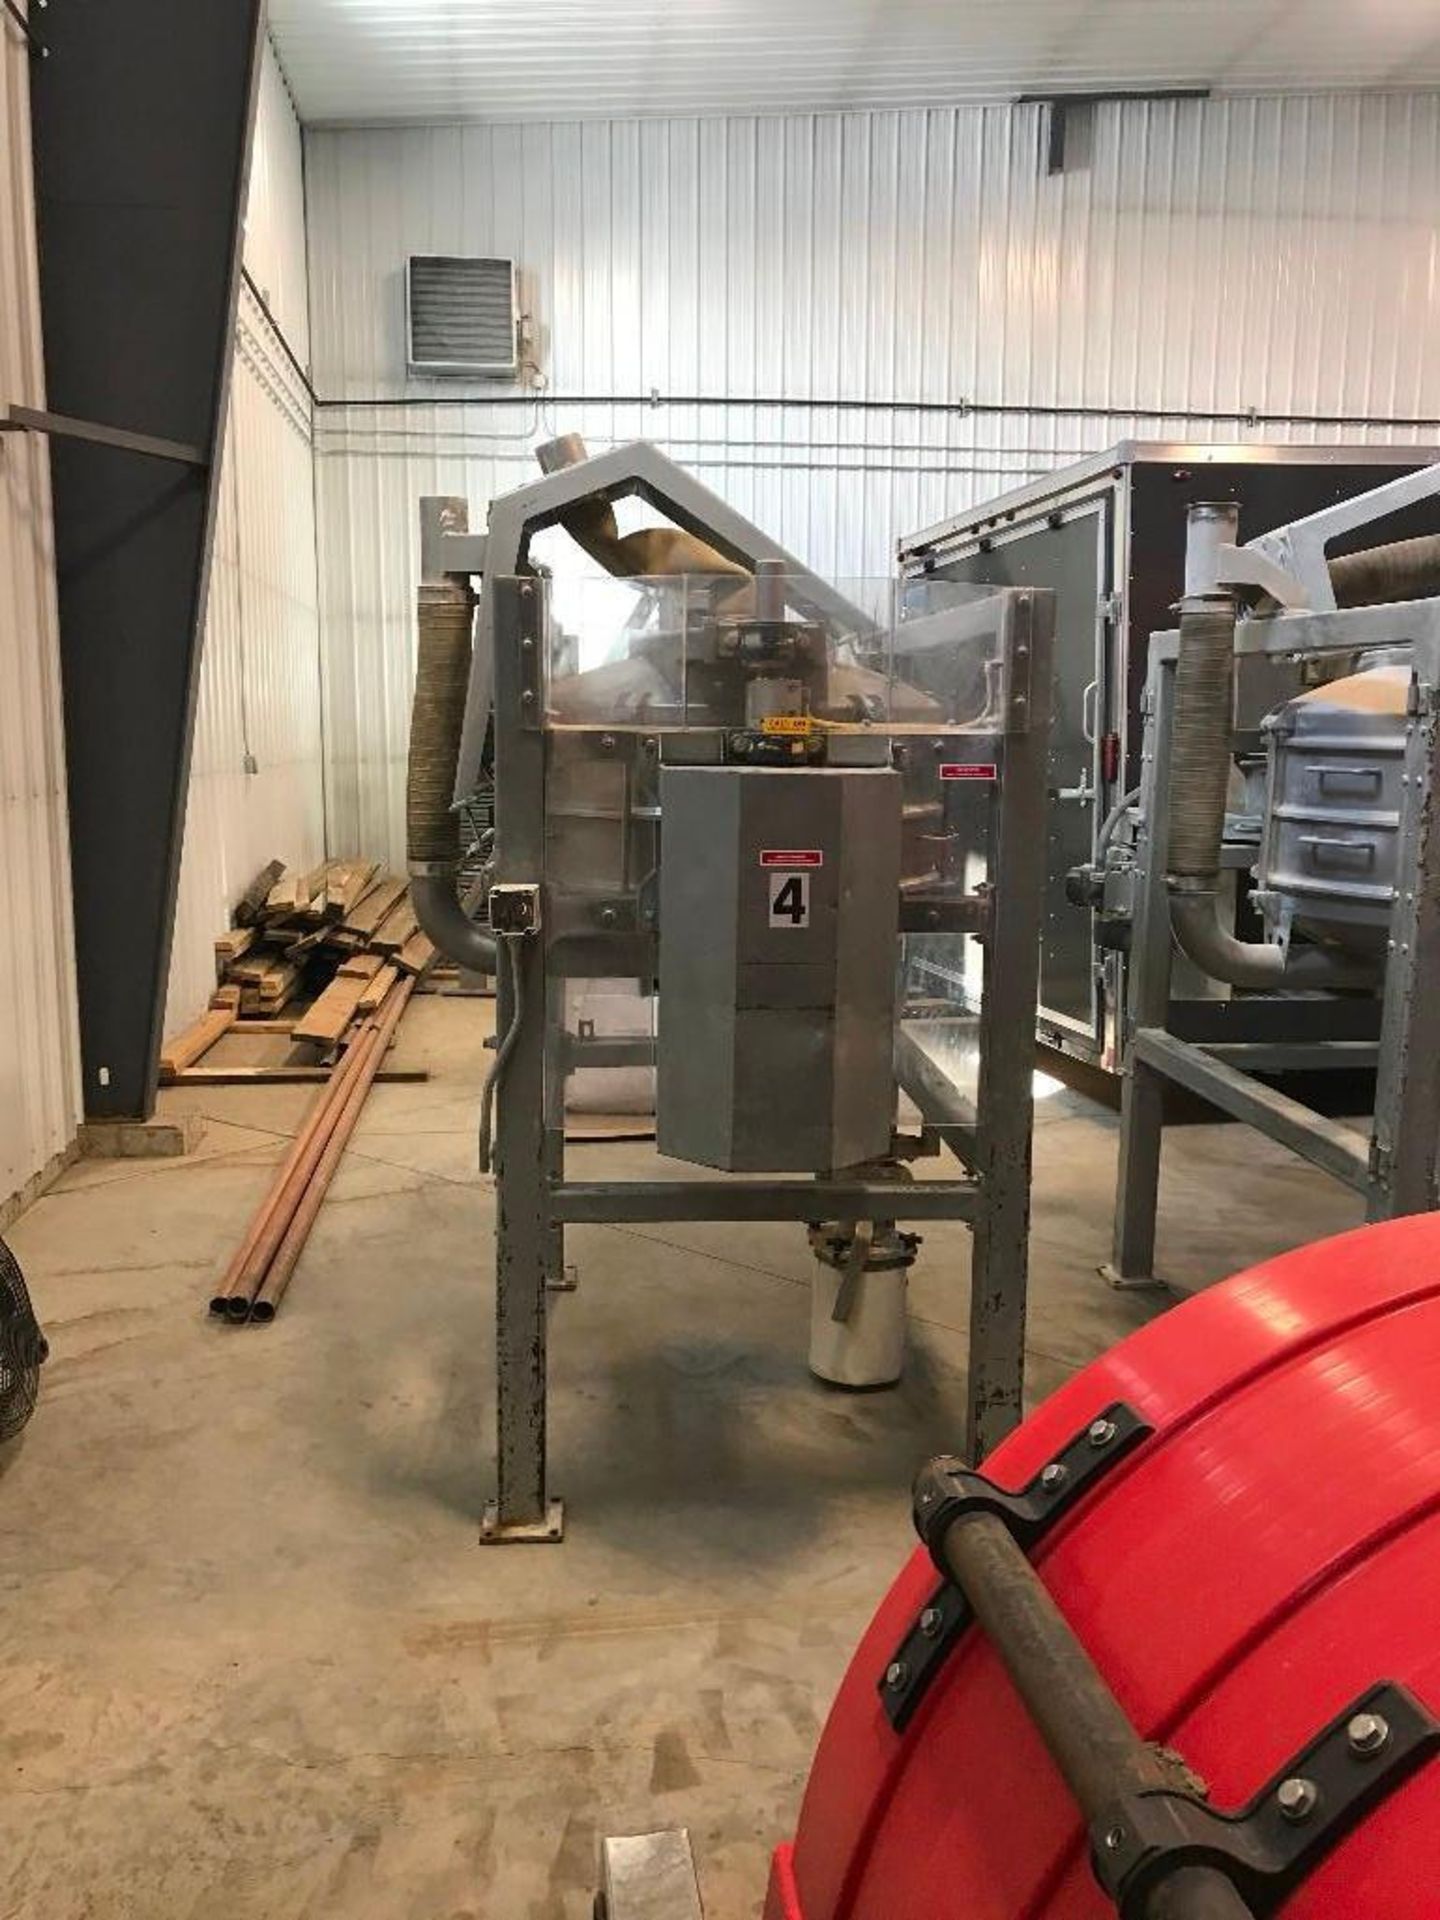 2001 Great western deck sifter, Type TB, Model 611M/2, Shop number 4101, 36 in. (Located in Stanton,